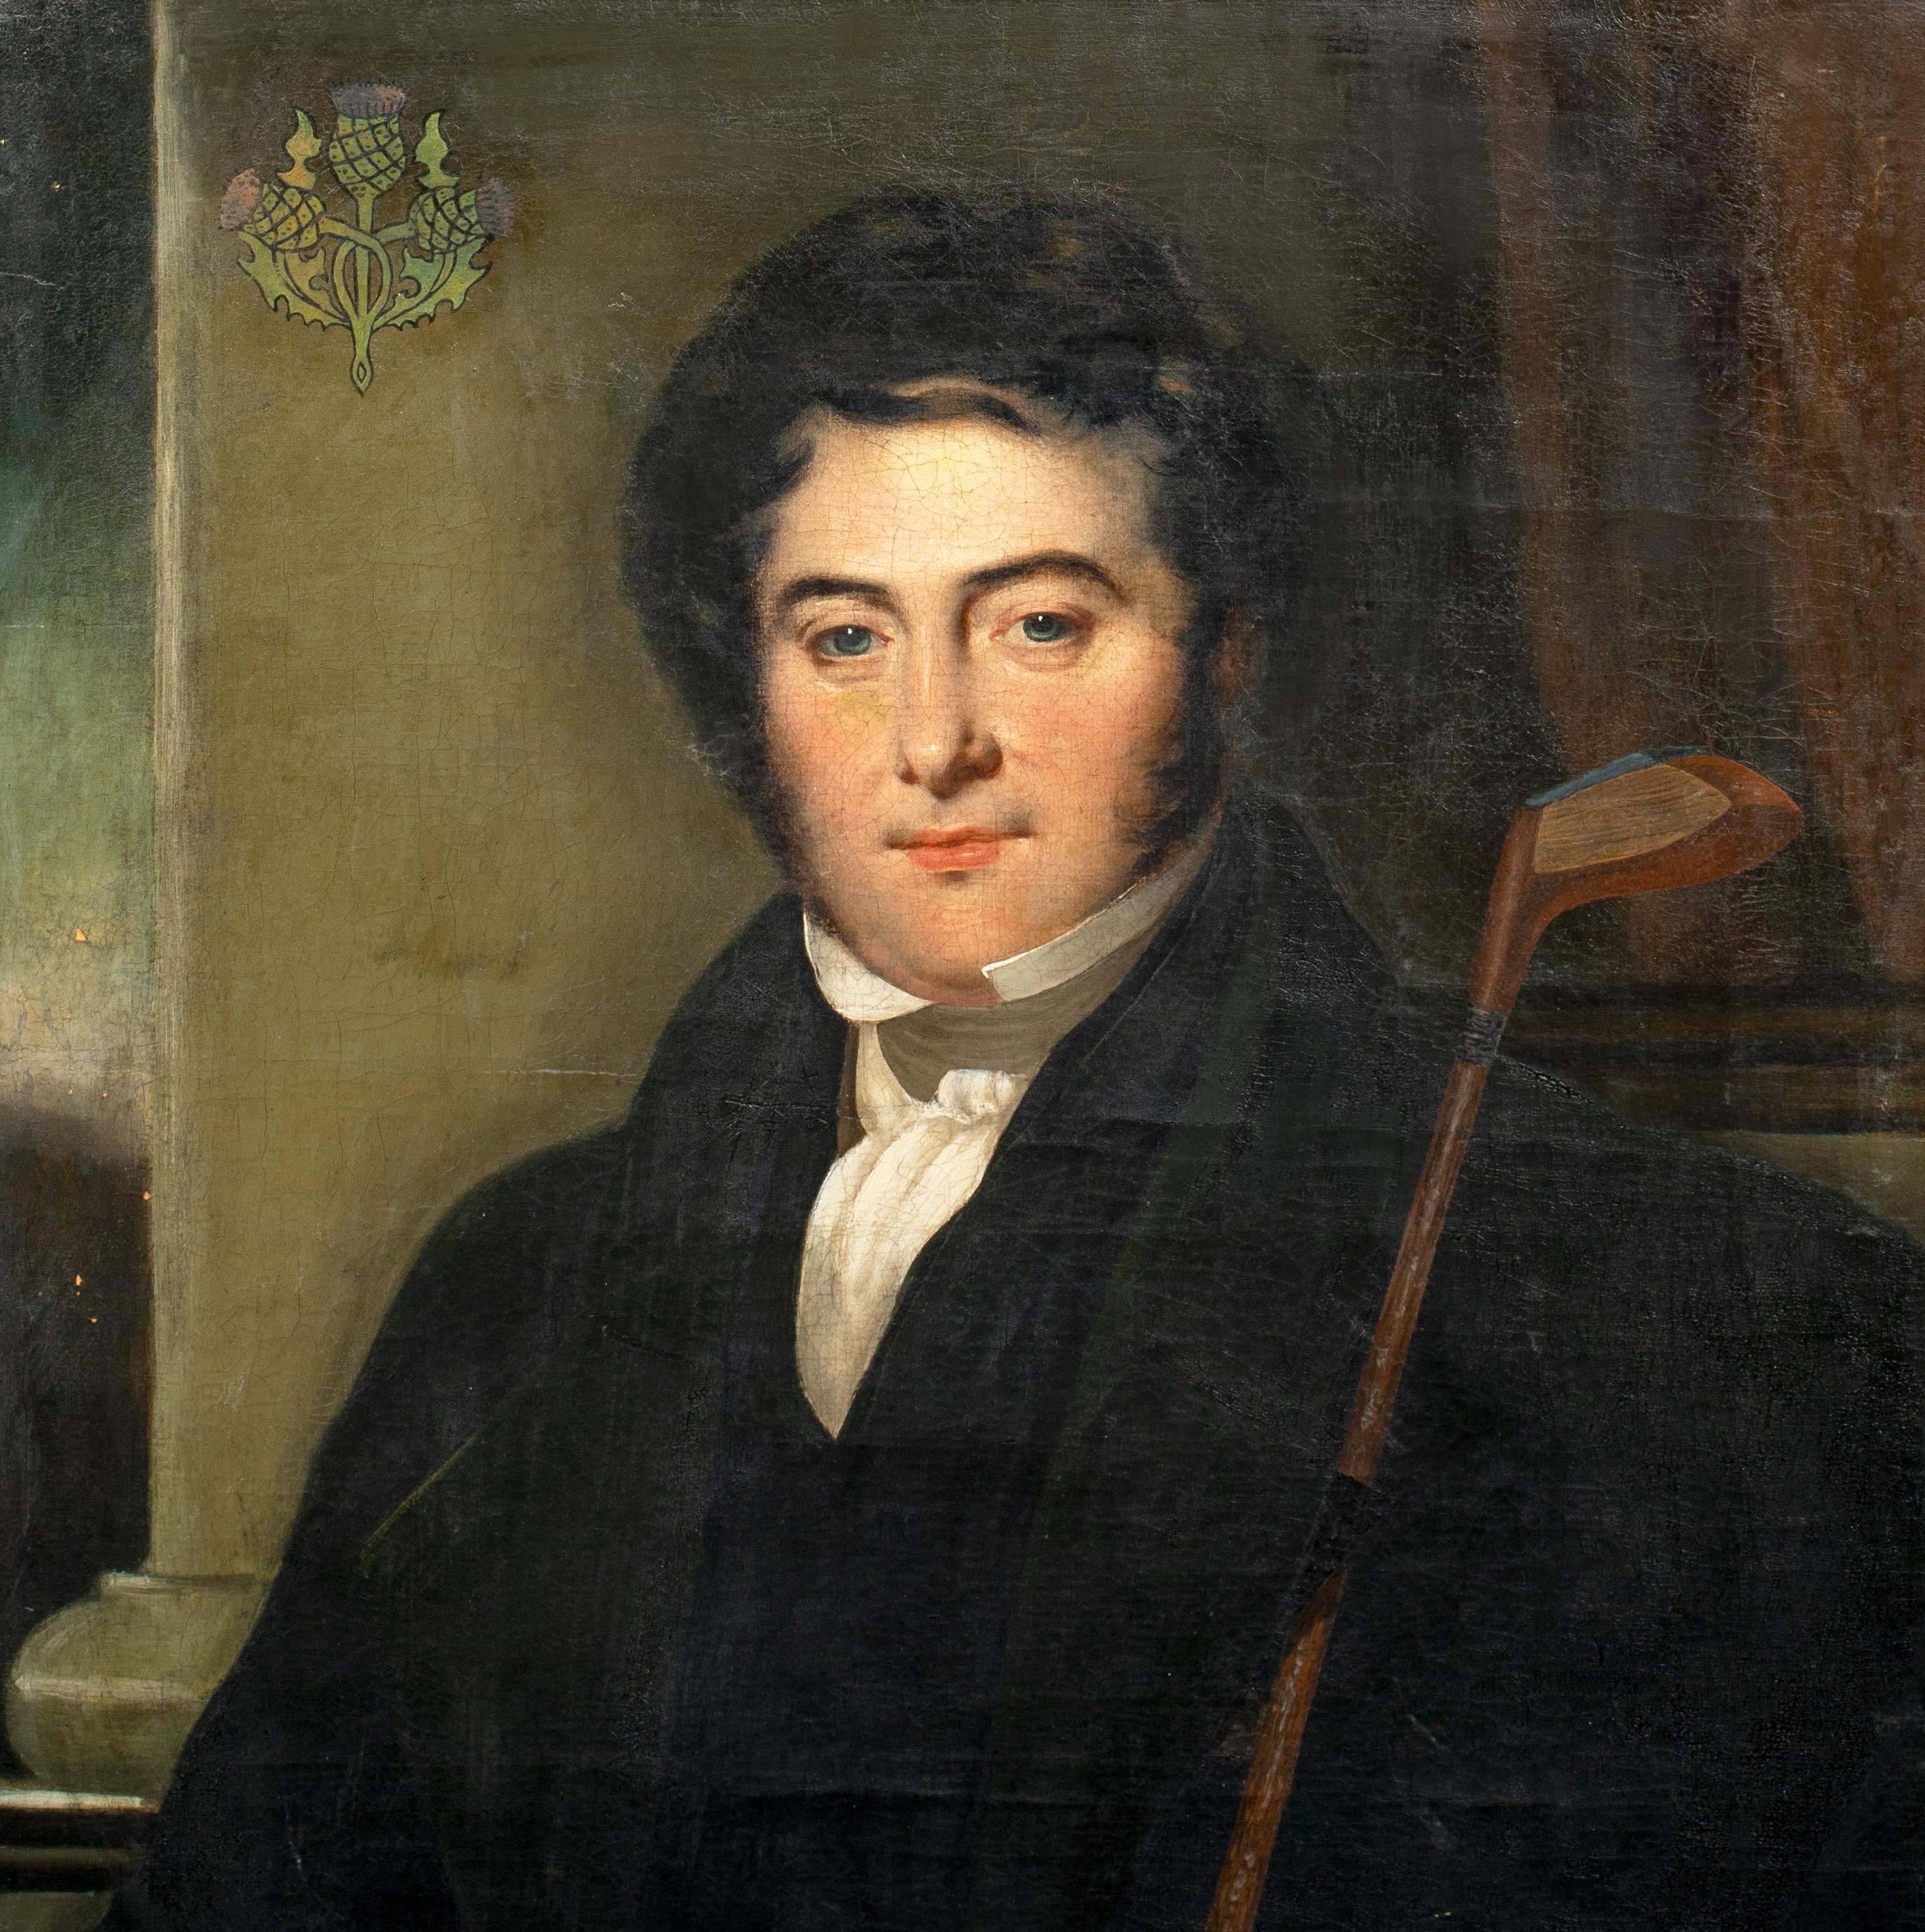 Portrait Of A Gentleman With A Golf Club, circa 1810 - Black Figurative Painting by Unknown